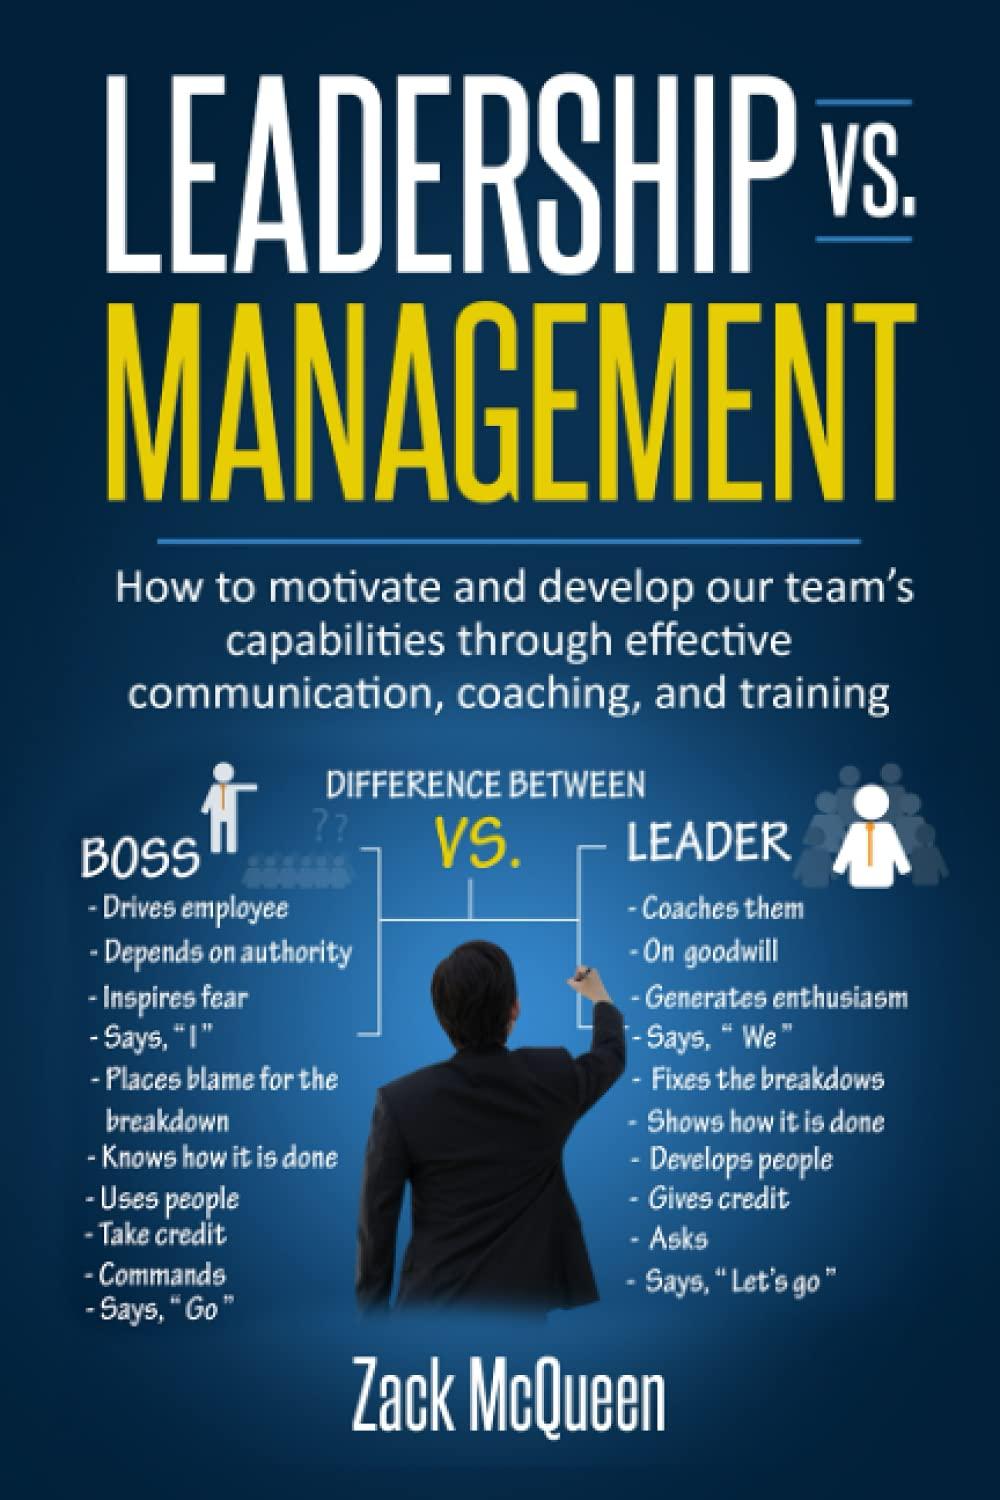 leadership vs management how to motivate and develop our teams capabilities through effective communication